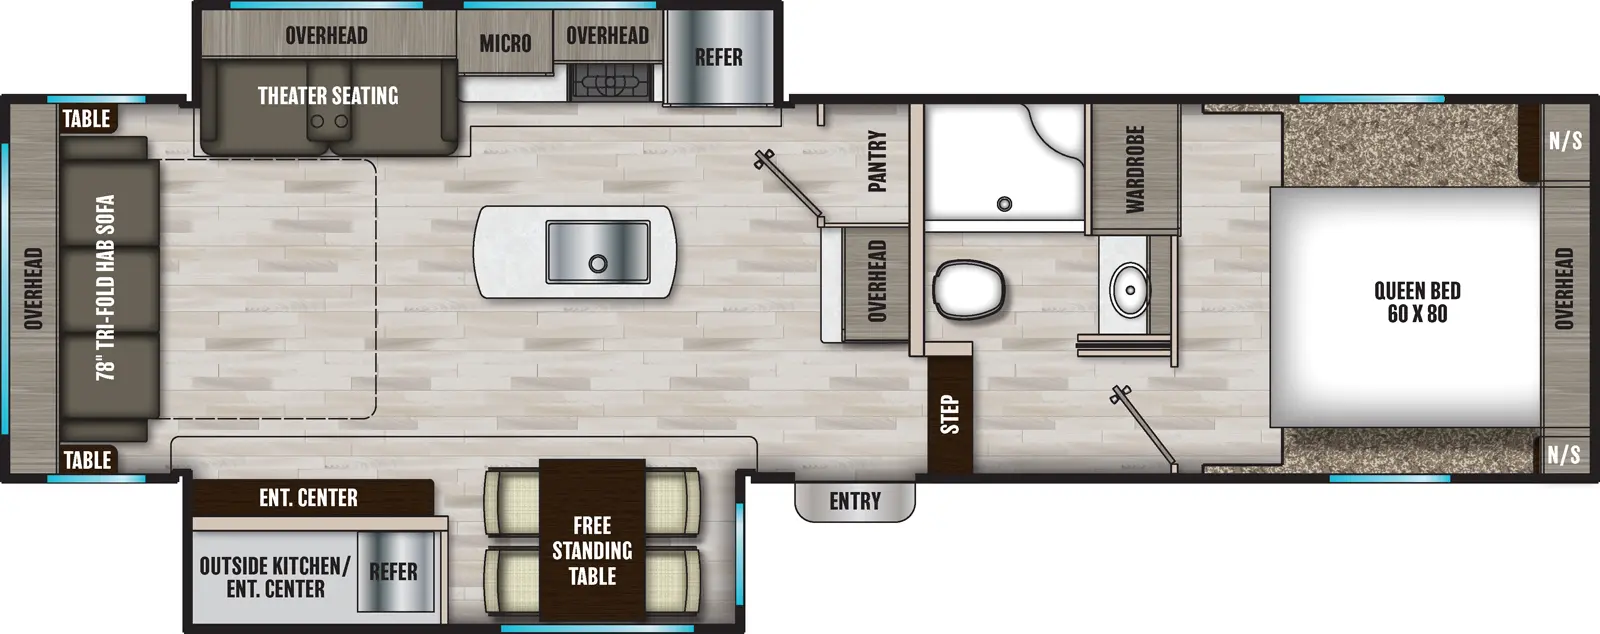 The 284RL has two slideouts and one entry. Exterior features an outside kitchen with entertainment center. Interior layout front to back: front bedroom with a foot facing queen bed with overhead cabinet, night stands on either side, and off-door side wardrobe; off-door side aisle full bathroom; step down to main living area and entry; counter with overhead cabinet, and pantry along inner wall; kitchen island with sink; off-door side slideout with refrigerator, countertop, overhead cabinet, microwave, and theater seating with overhead cabinet; door side slideout with free-standing table and entertainment center; rear tri-fold hide-a-bed sofa with tables on each side, and overhead cabinet.